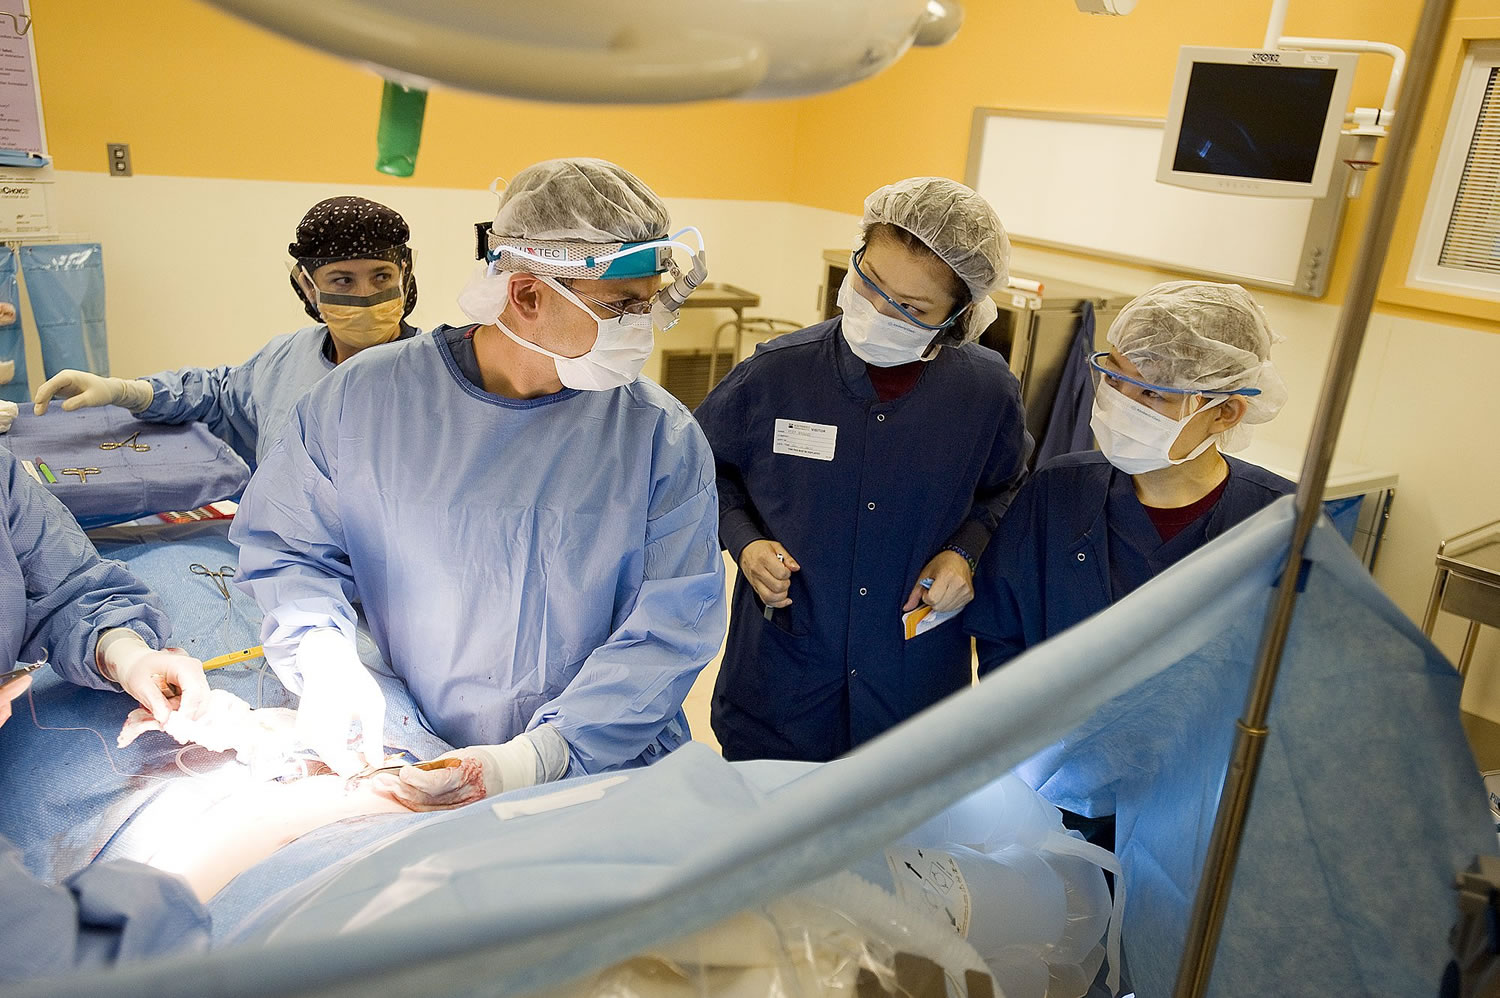 Dr. Allen Gabriel, left, explains his surgical decisions to Japanese surgeons Hiroko Taneda, right, and Mika Watanabe, center, during a panniculectomy at PeaceHealth Southwest Medical Center Wednesday.